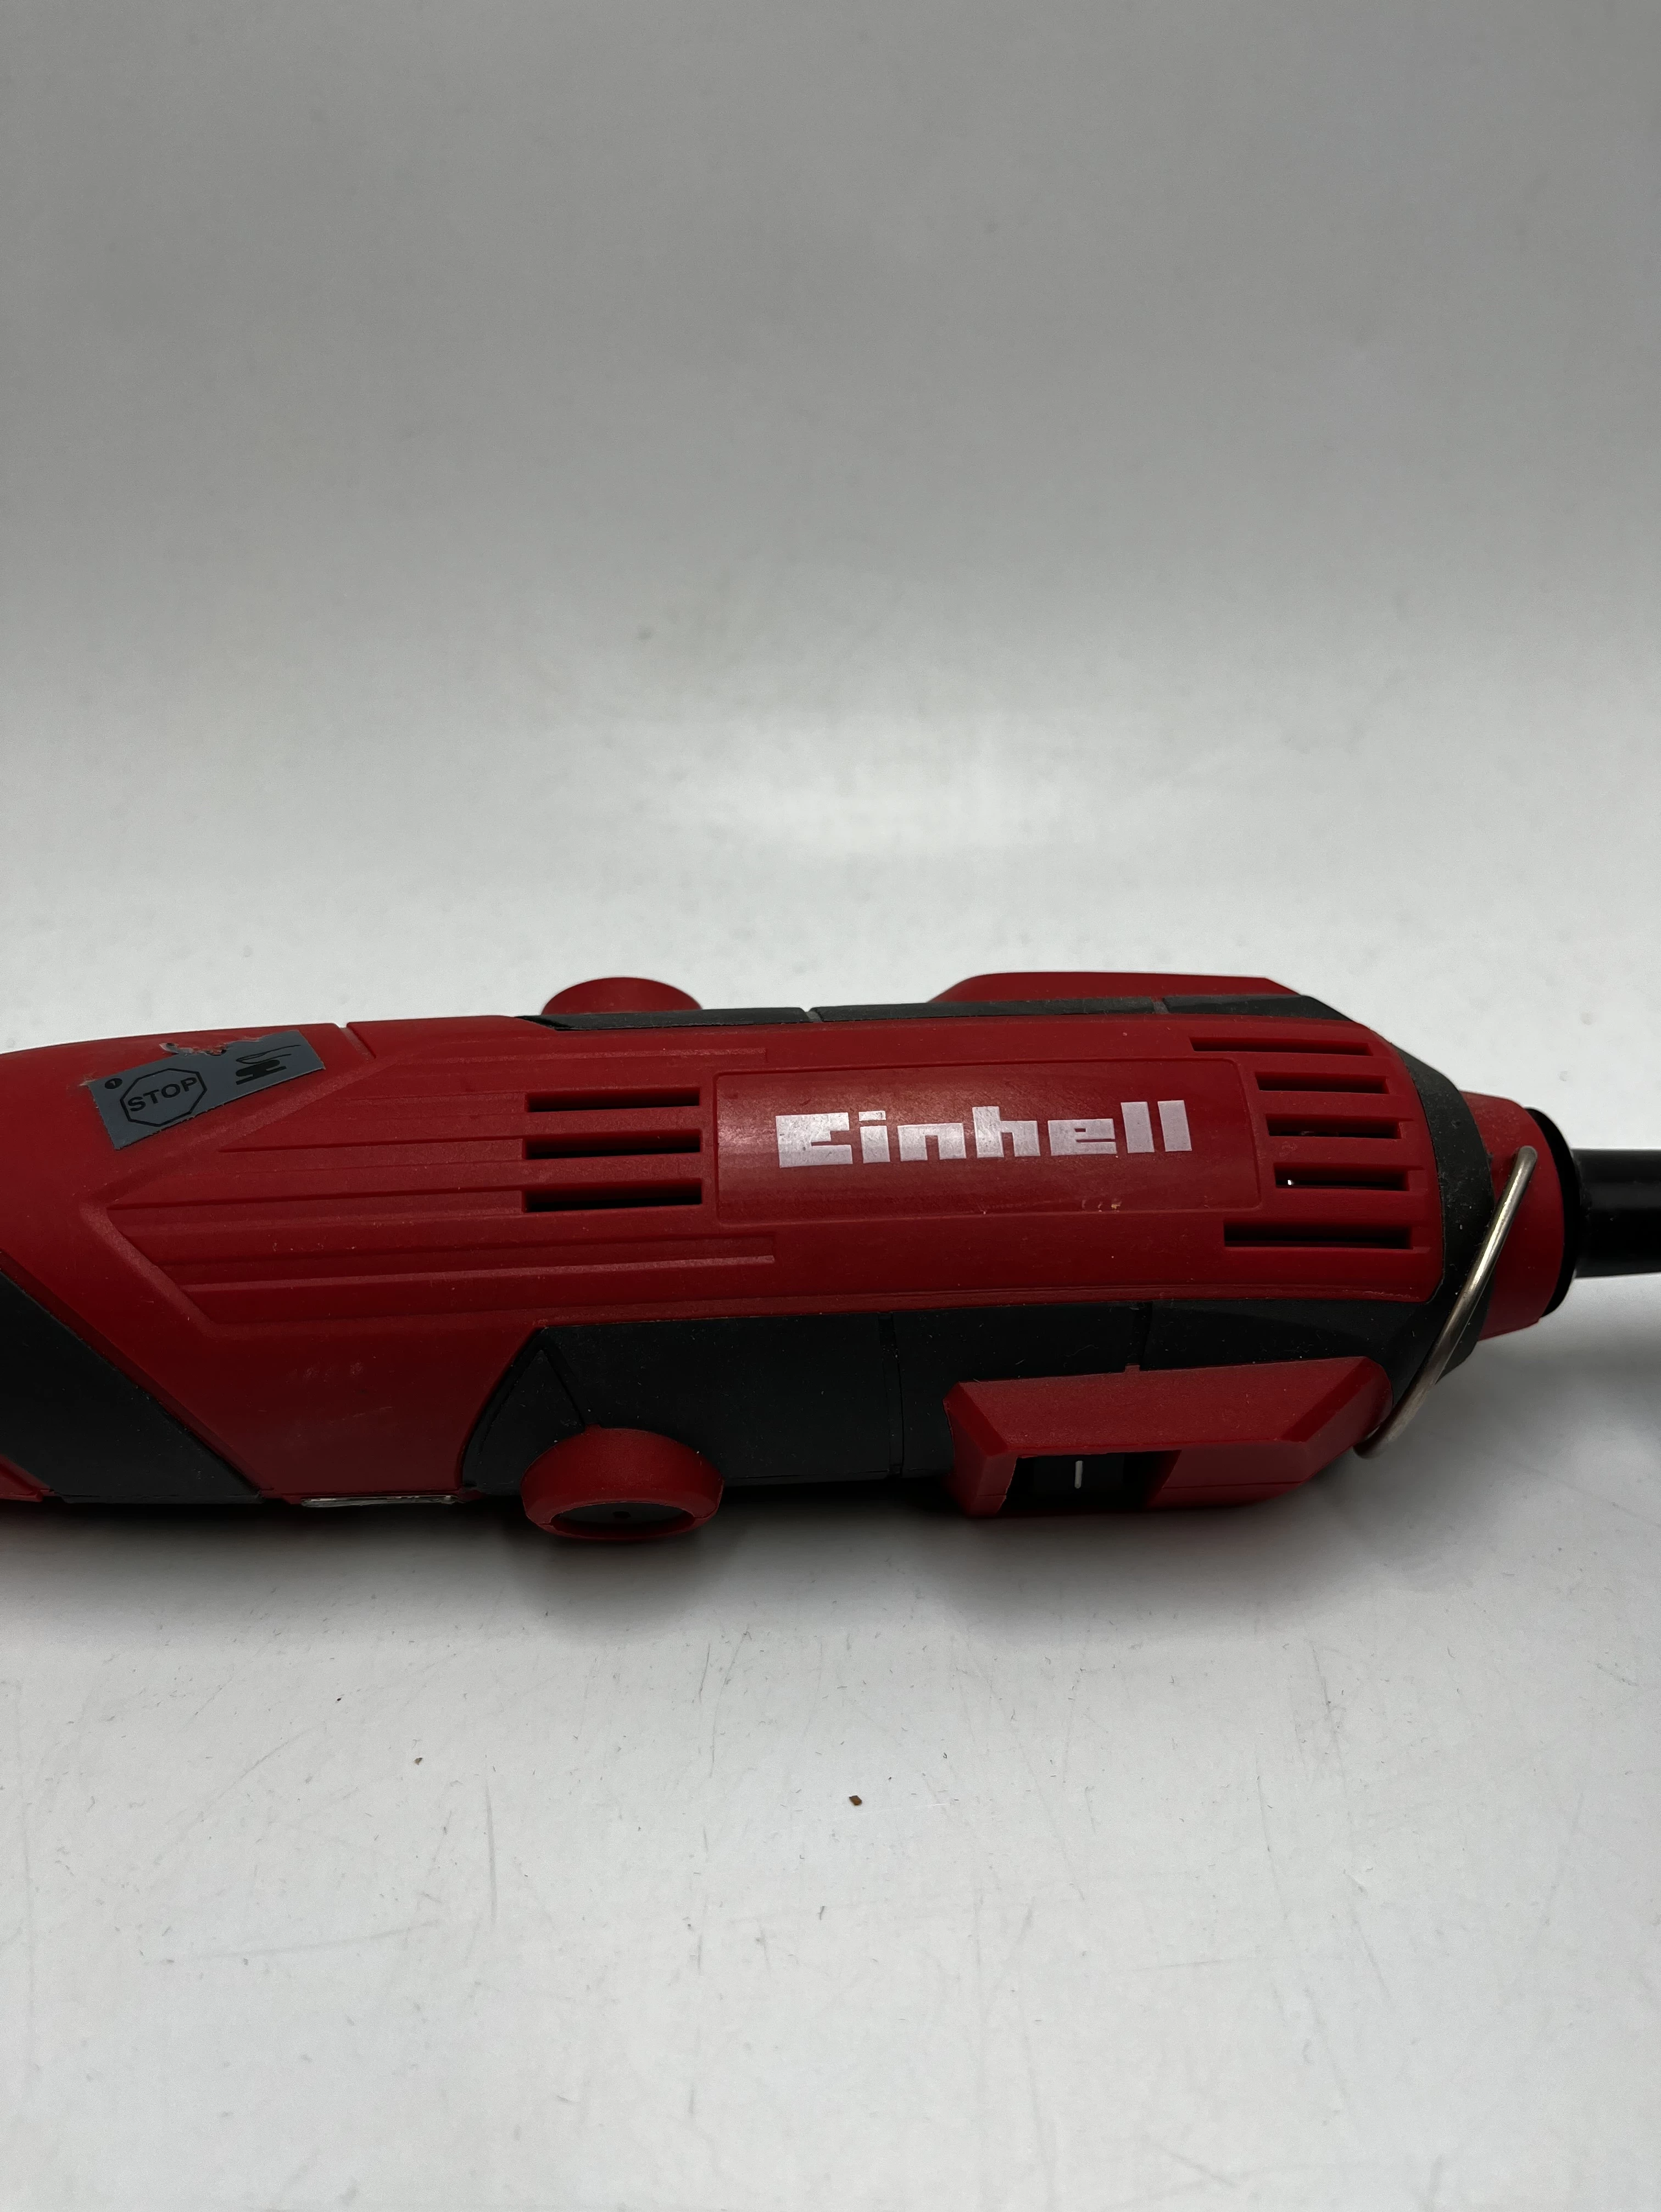 EINHELL TC-MG 135 E - 135W Grinding and Engraving Tool